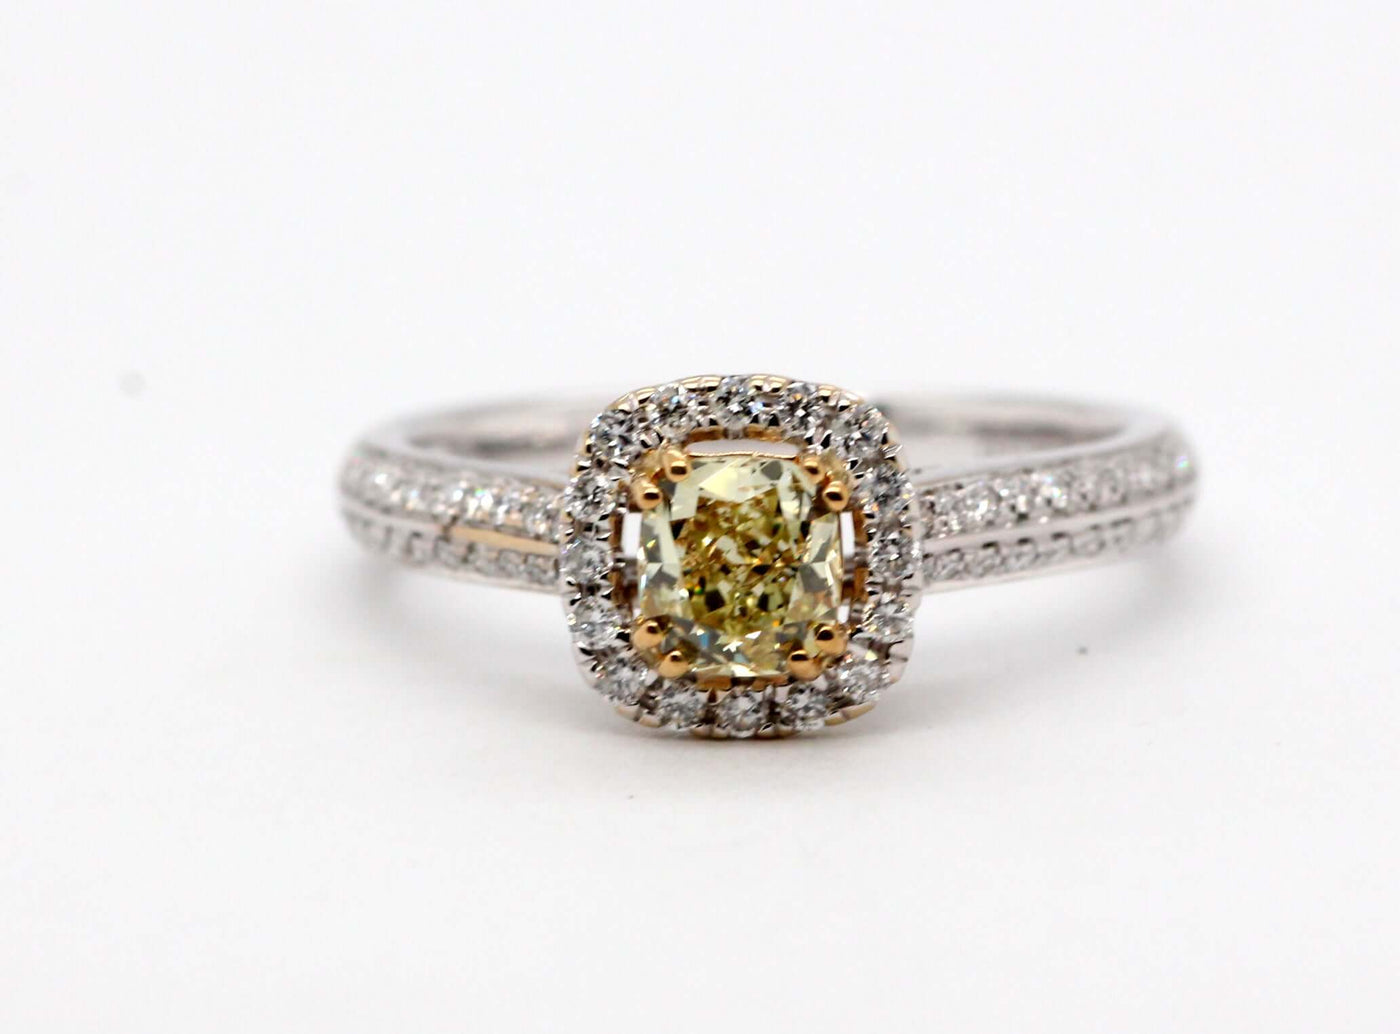 18ky .62 ct yellow diamond and .42 cttw colorless diamond ring